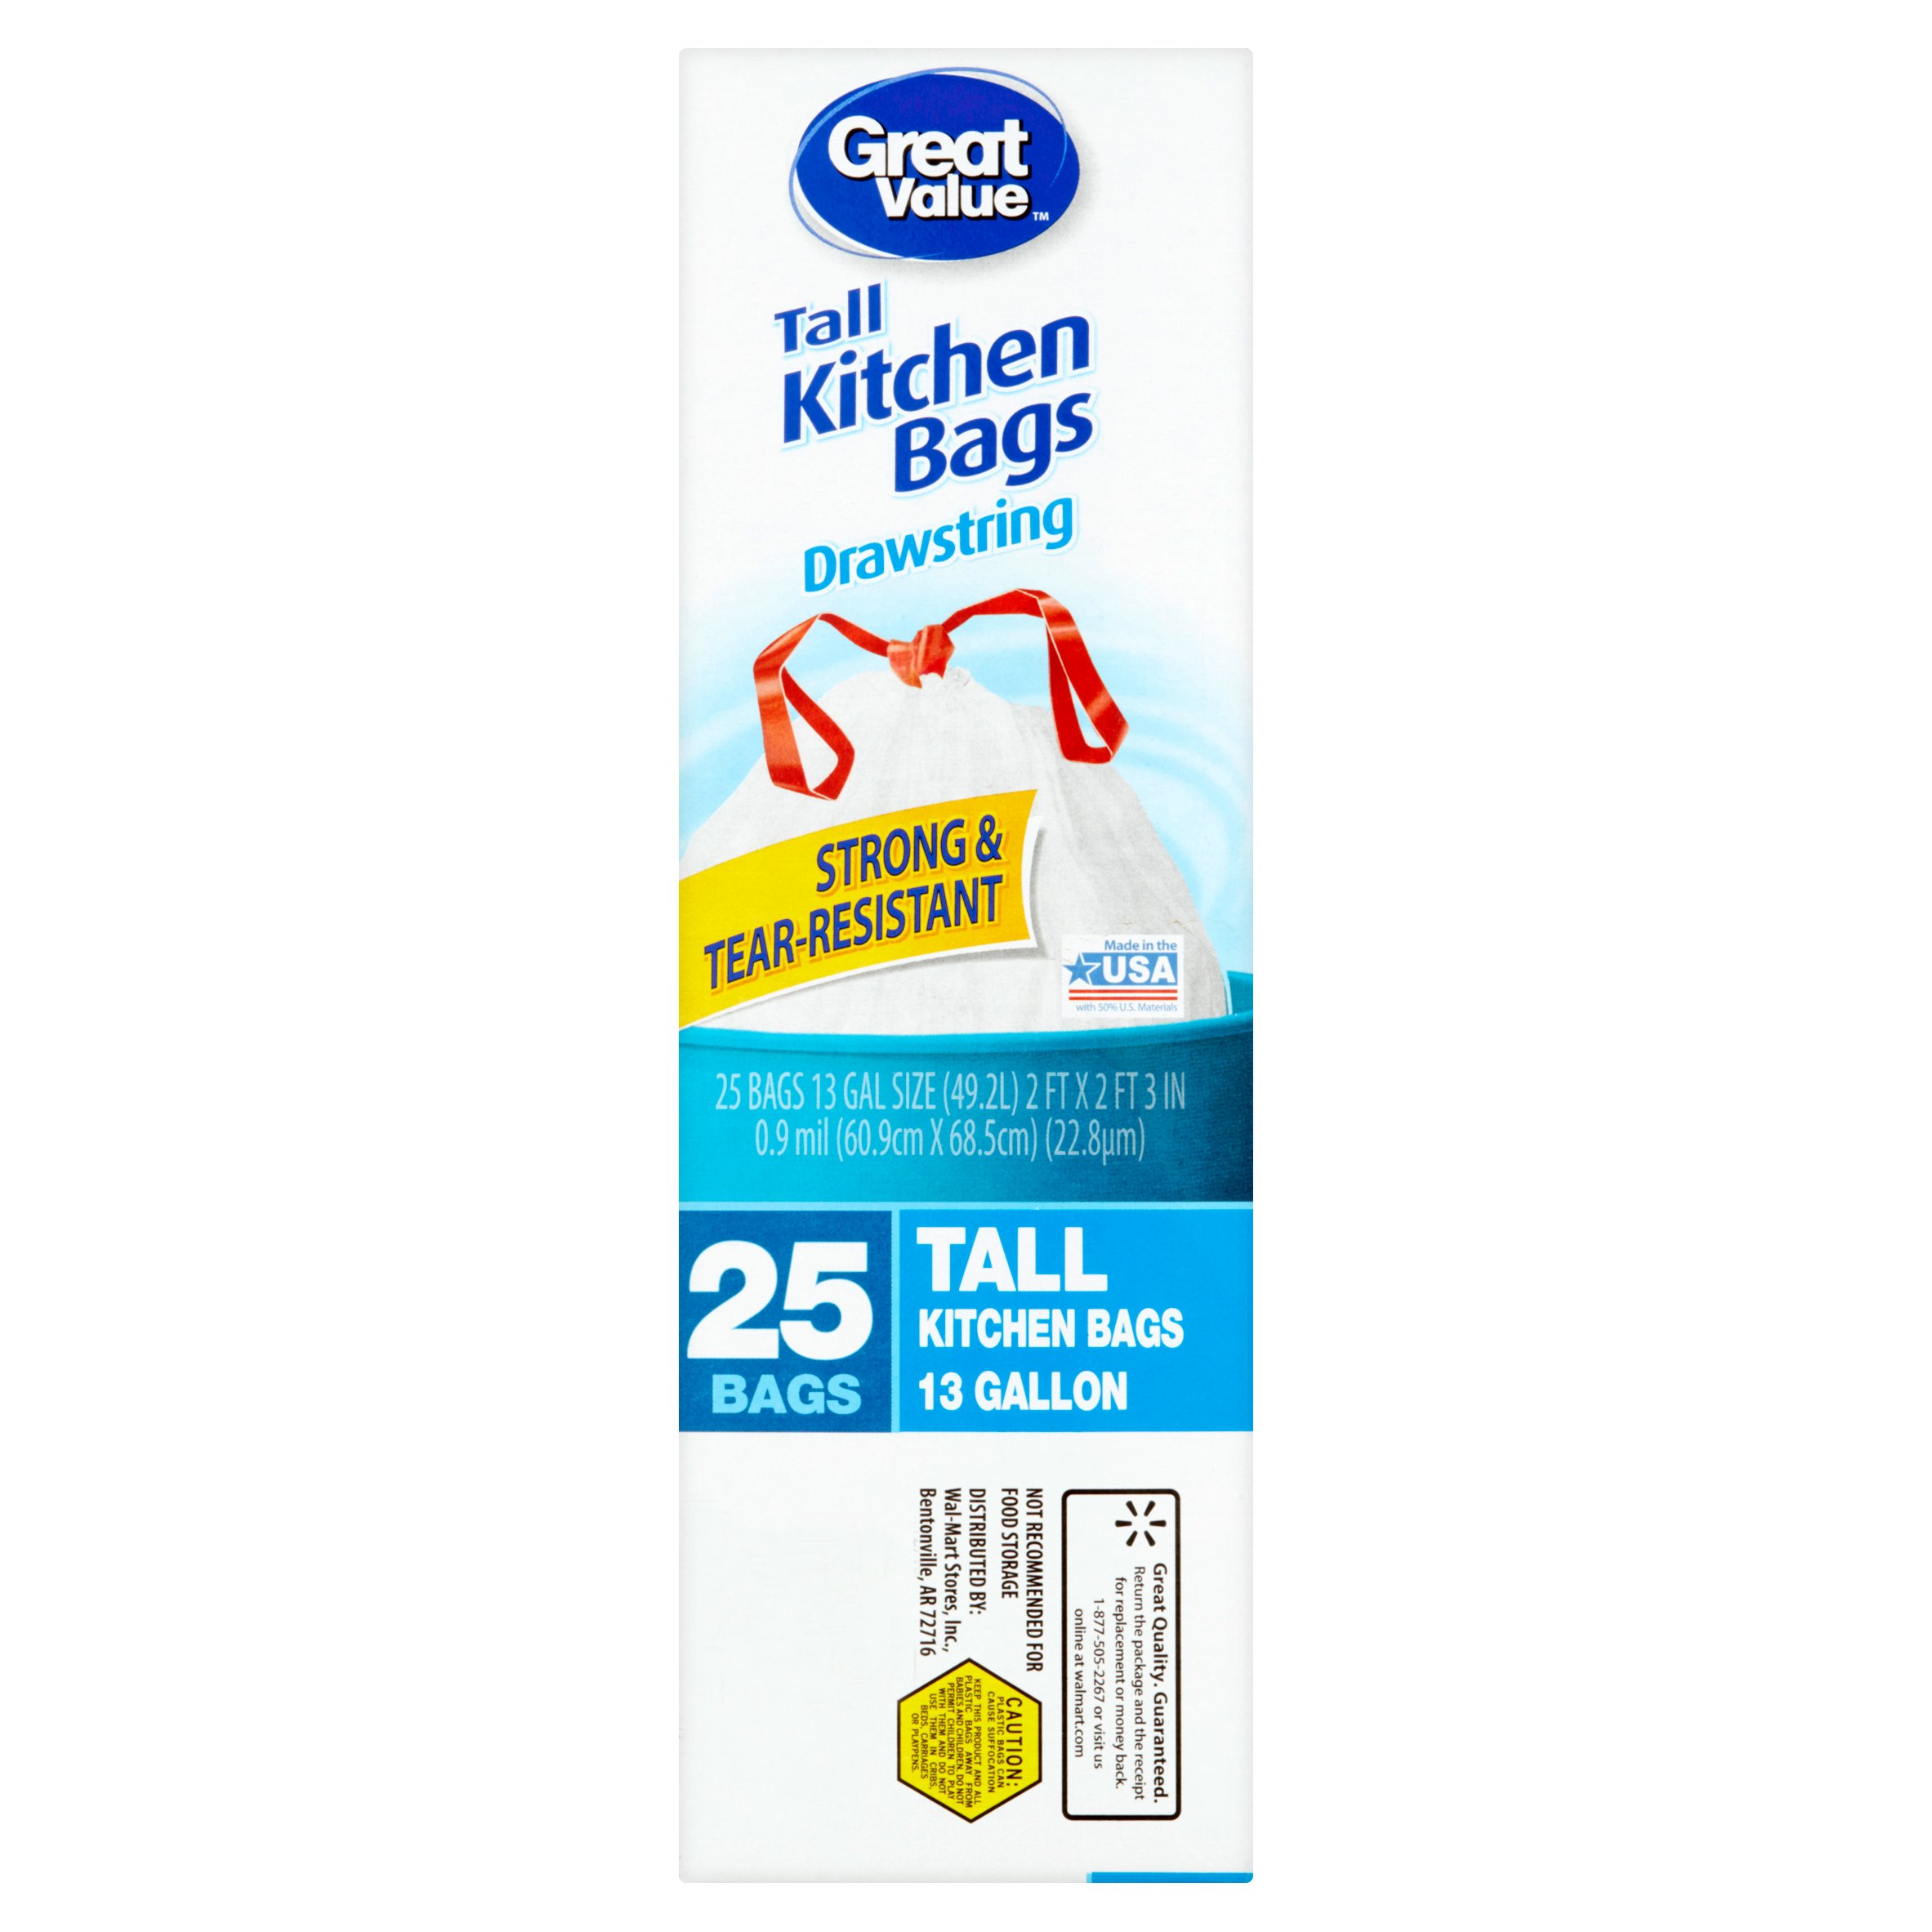 Great Value Tall Kitchen Drawstring Trash Bags, 13 Gallon, 25 Count - image 5 of 5